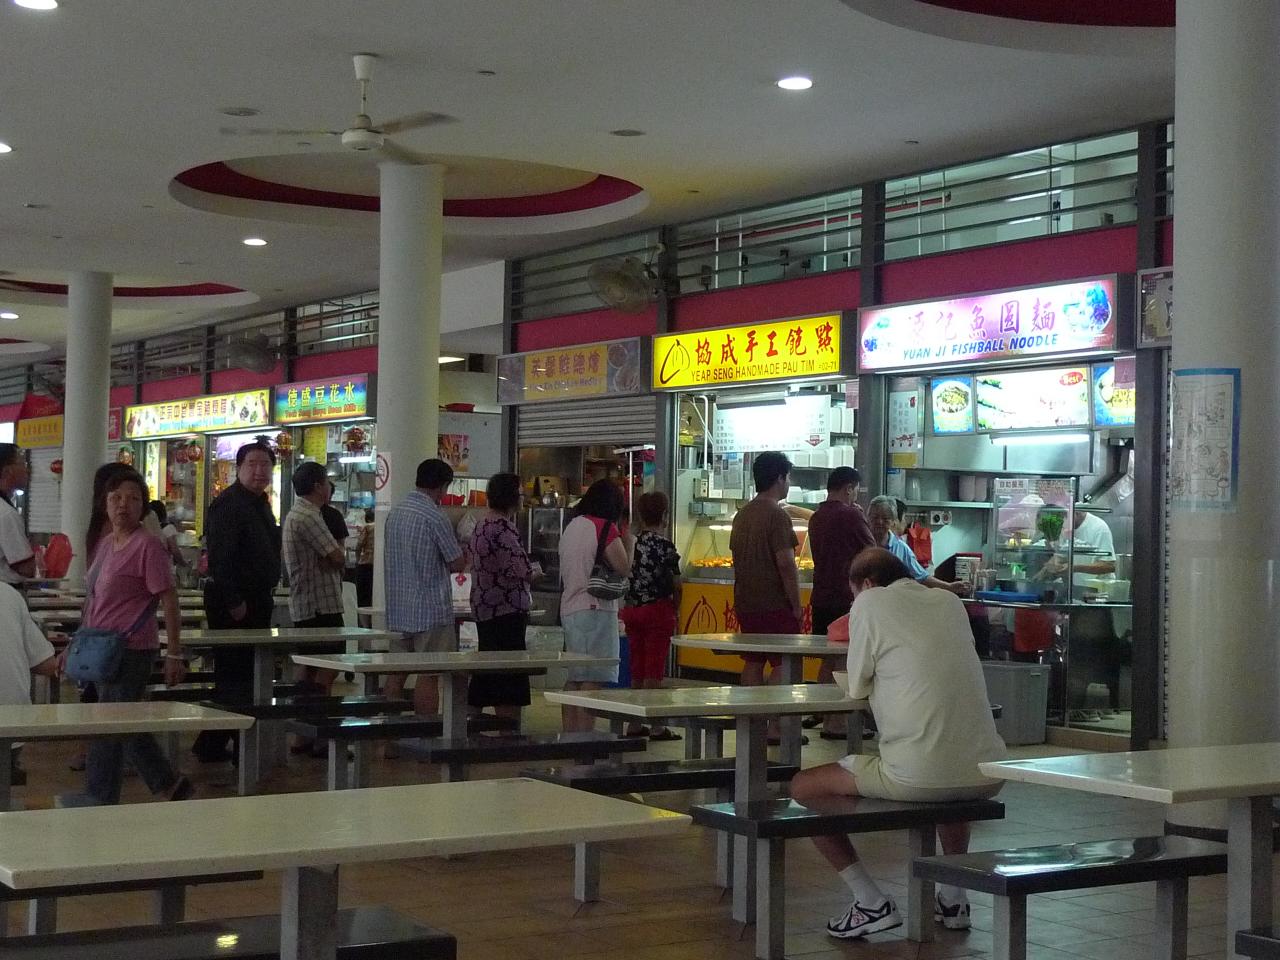 there are a lot of people at this food court